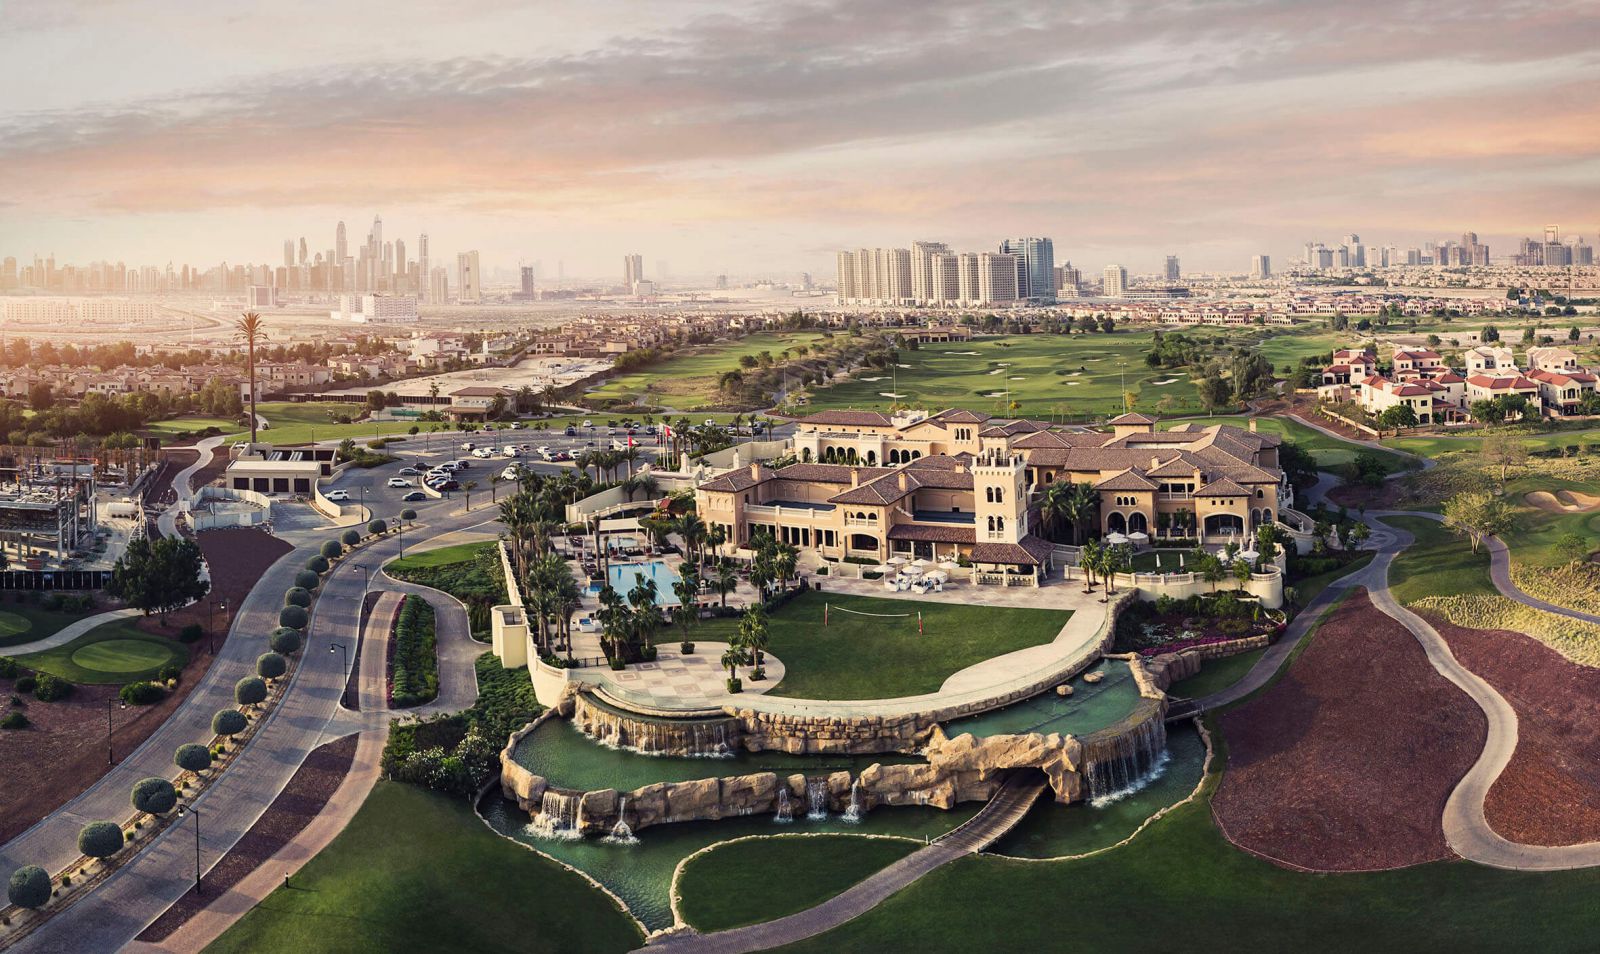 JUMEIRAH GOLF ESTATES TO OFFER 1% MONTHLY INSTALMENTS OFFER FOR ALANDALUS APARTMENTS AT CITYSCAPE GLOBAL